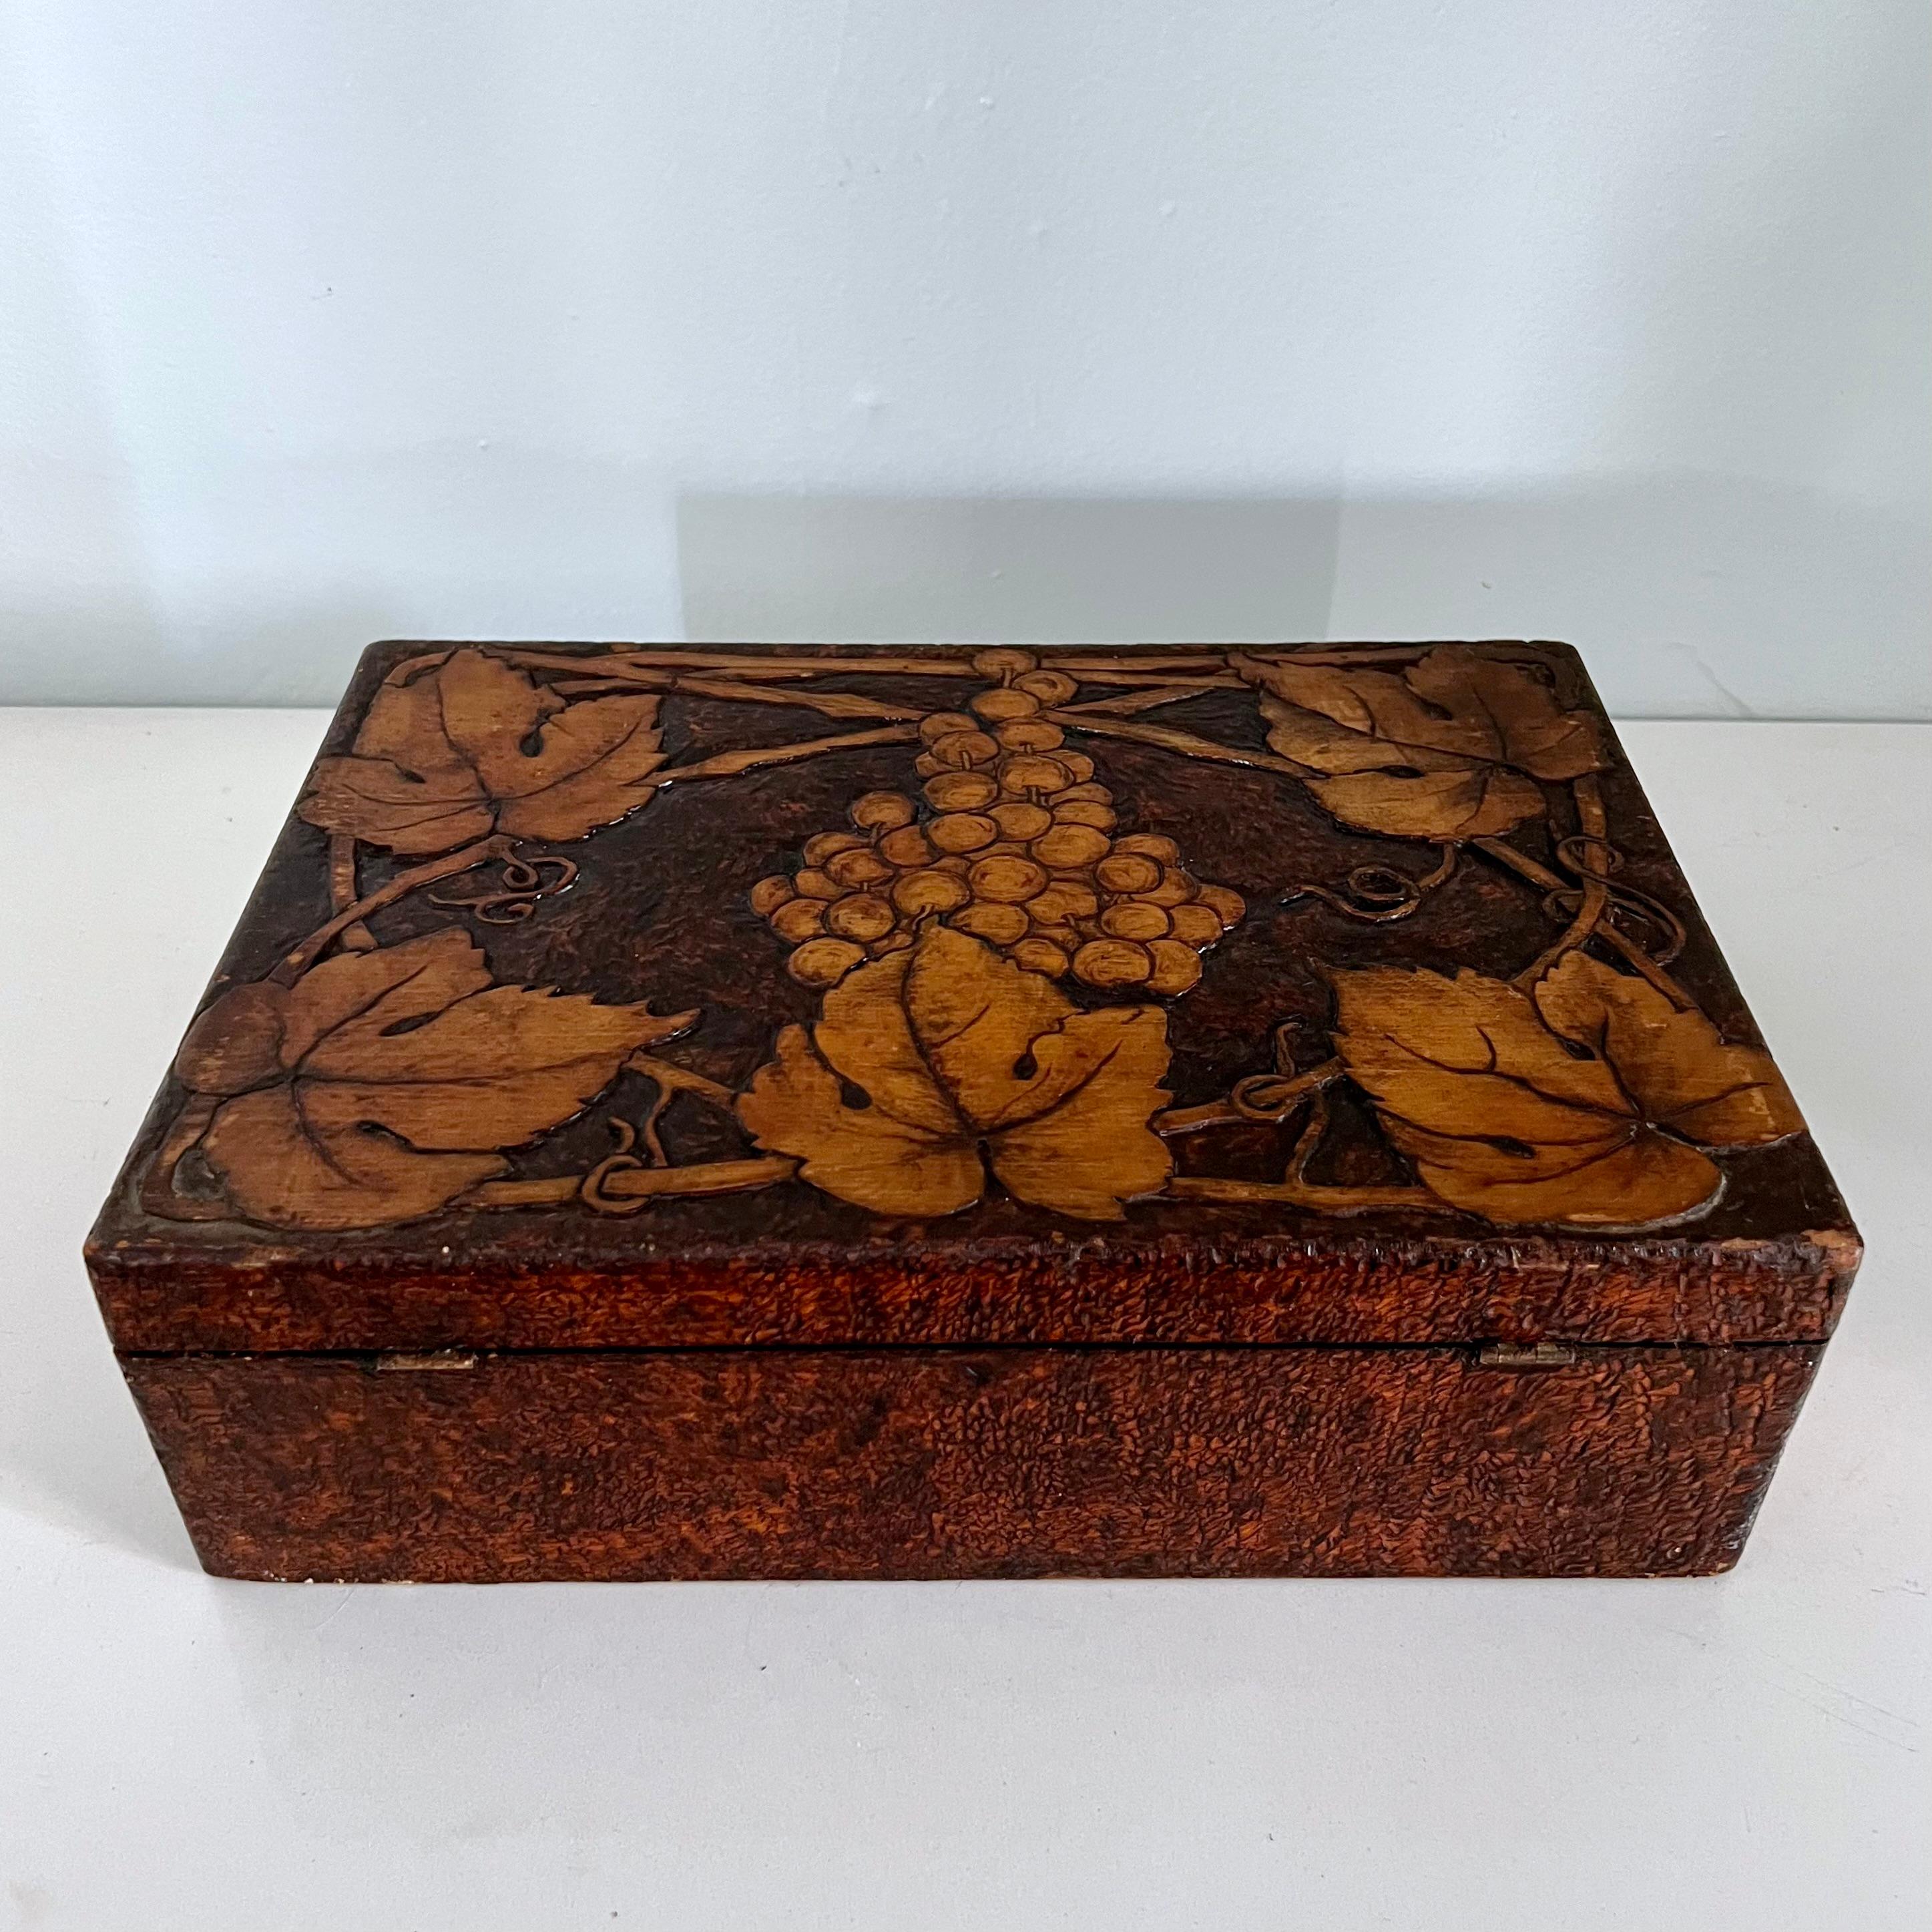 20th Century Folk Art Hand-Carved Wooden Box with Grapes and Leaves For Sale